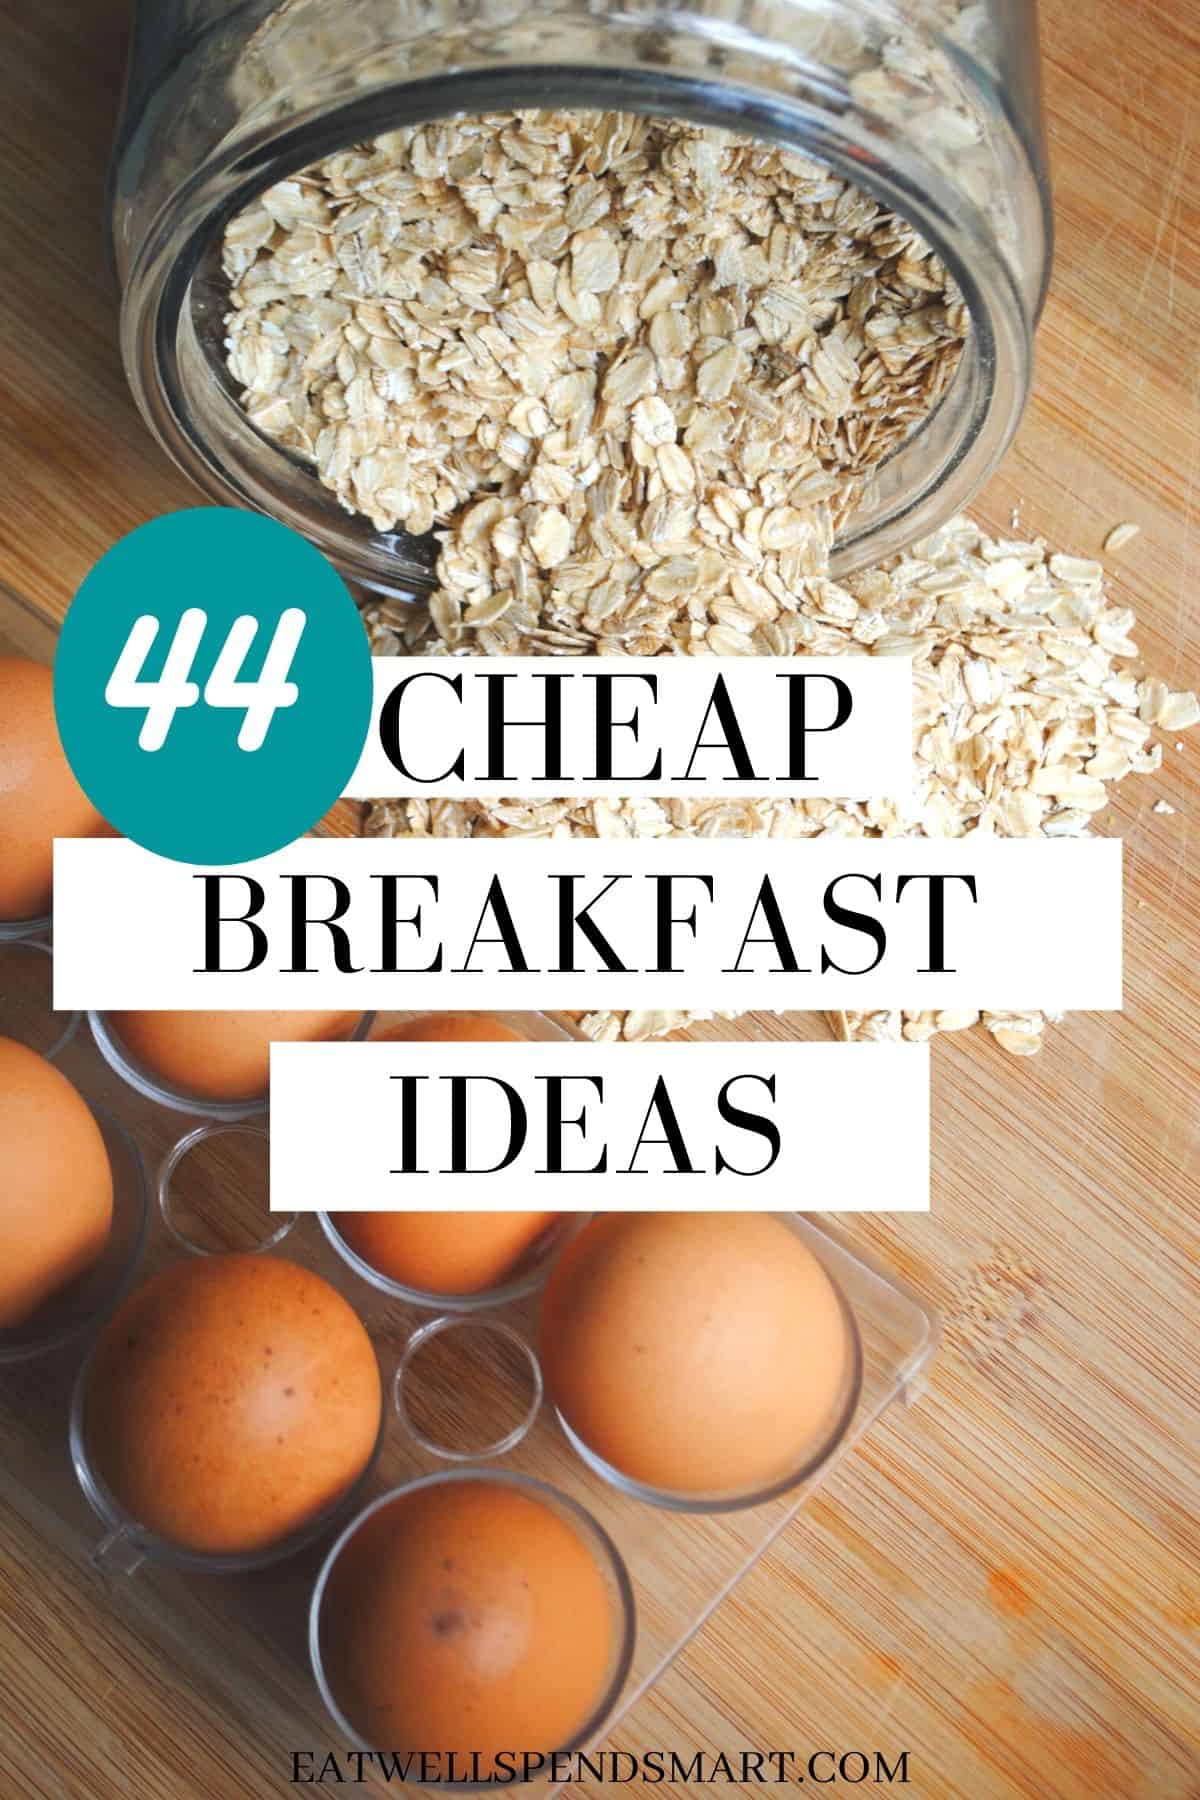 Reduced price breakfast items